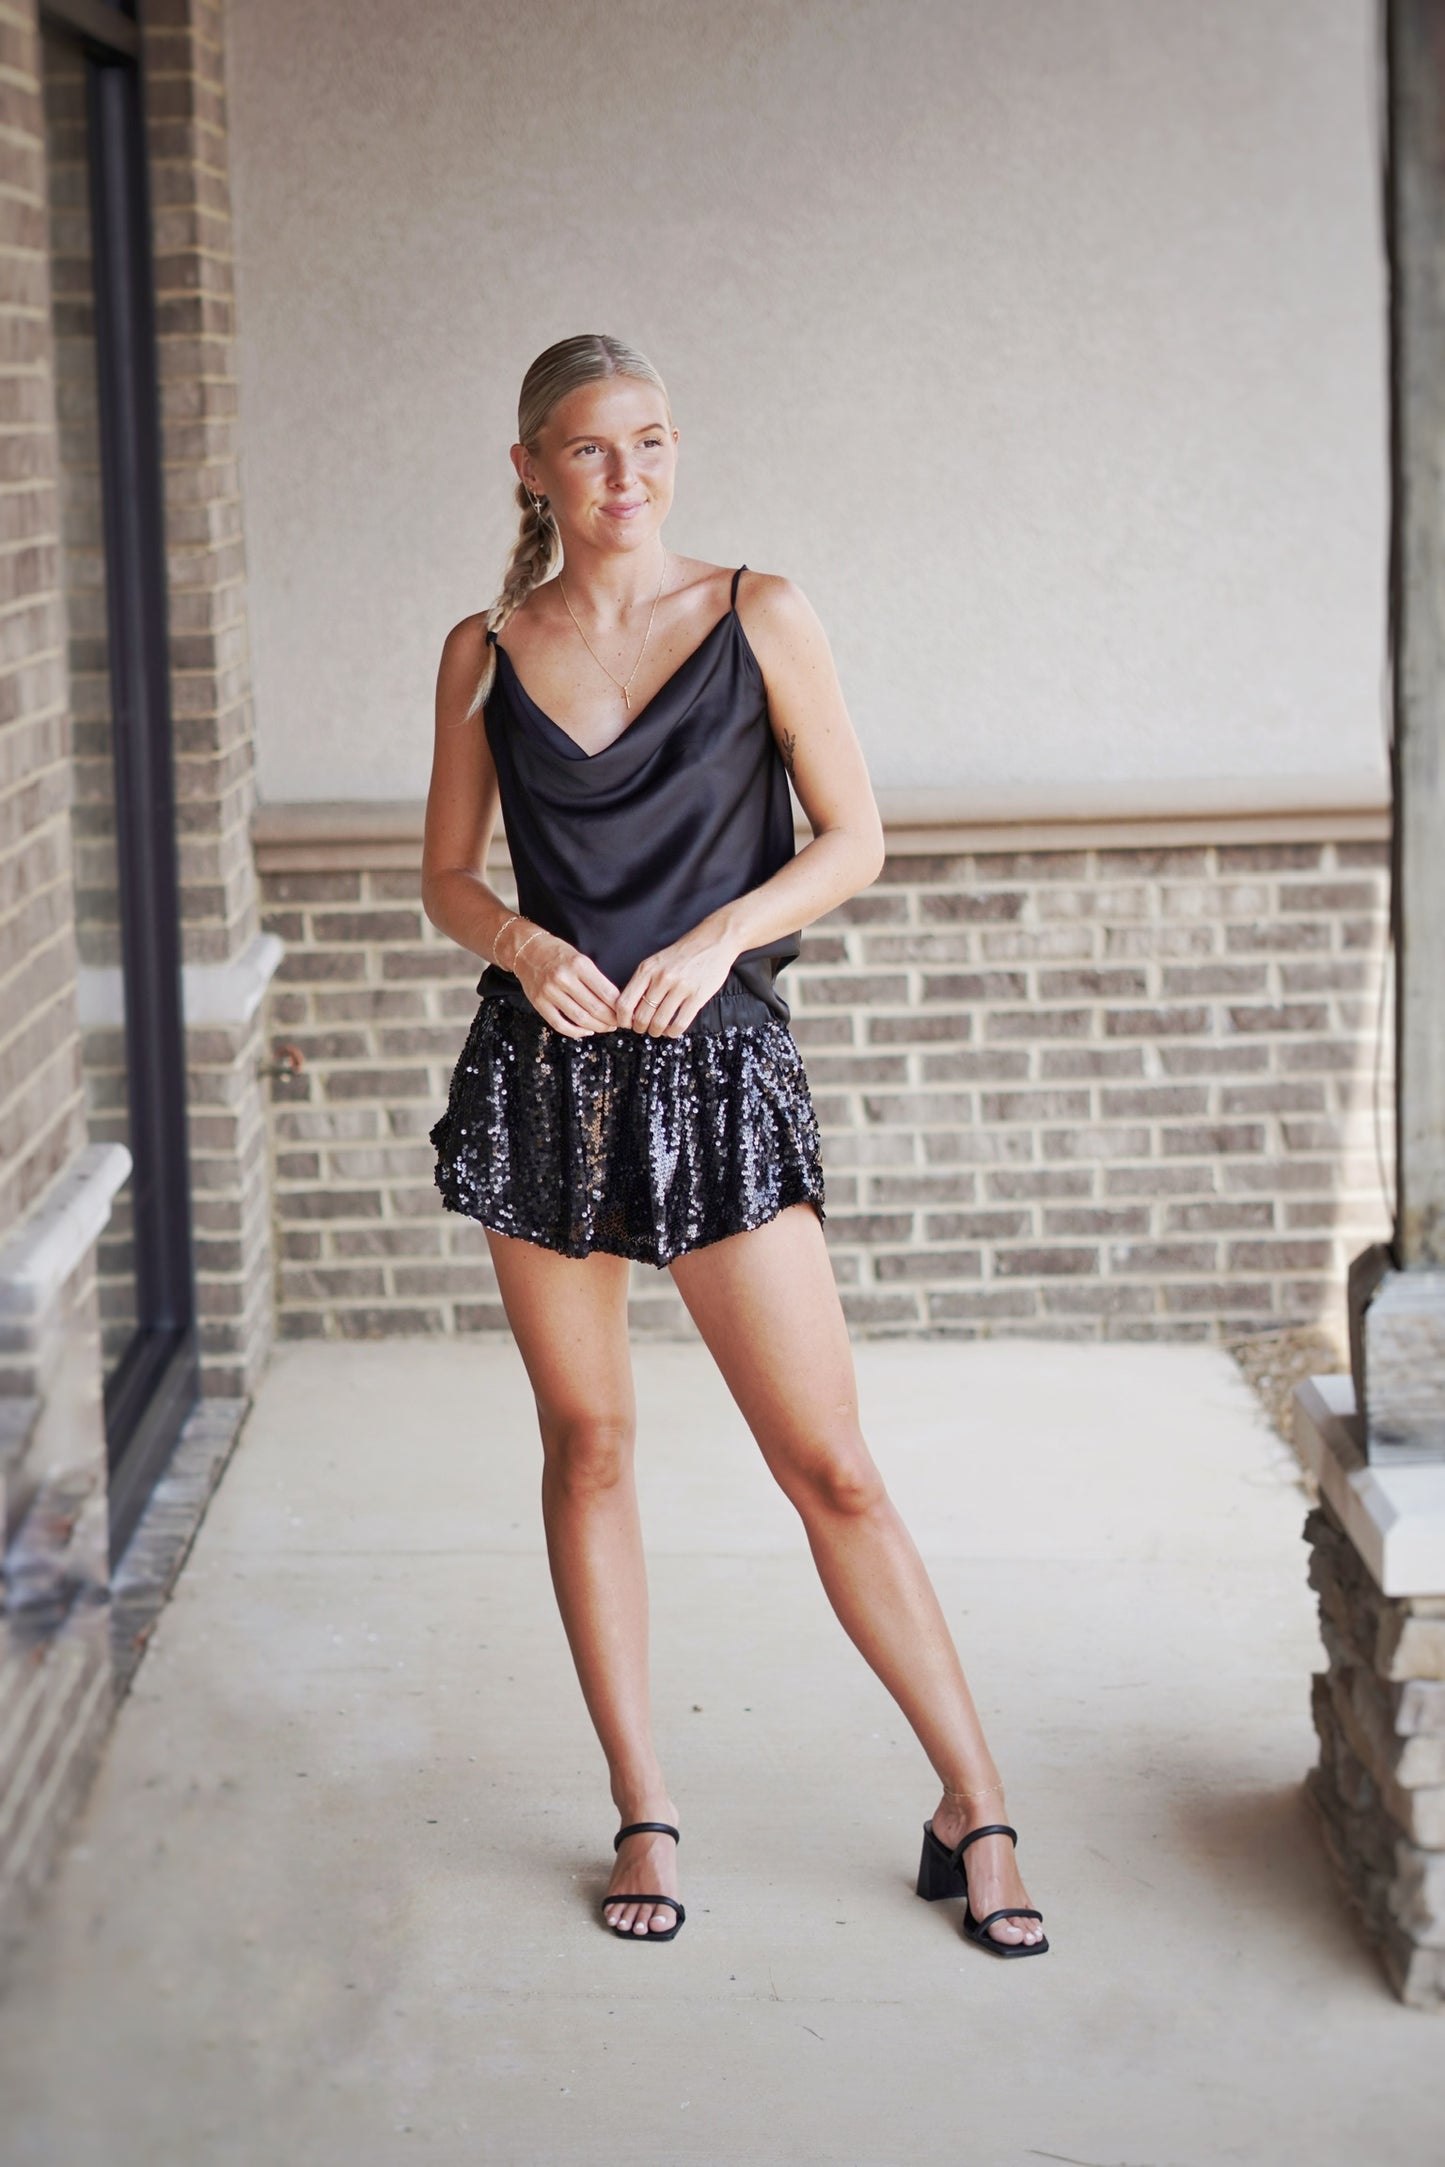 Sabrina Sequin High Waisted Skort High Waistline Skirt Layered over Front Black Sequins Slim Fit Waistband/ Loose Fit Shorts 100% Polyester Model is wearing a size small